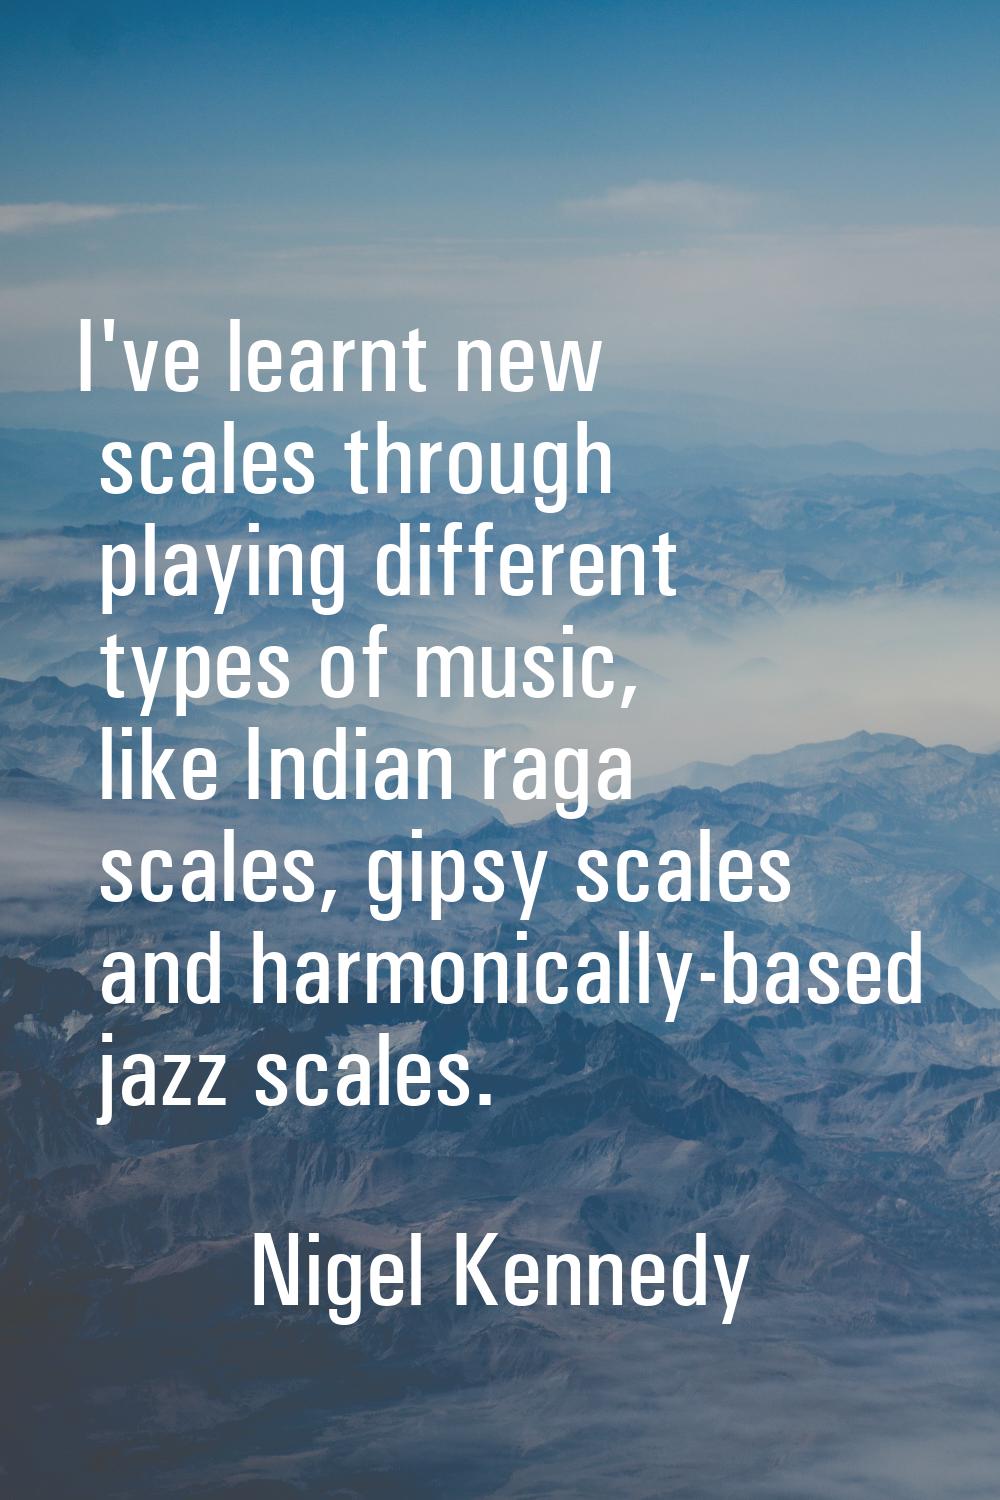 I've learnt new scales through playing different types of music, like Indian raga scales, gipsy sca